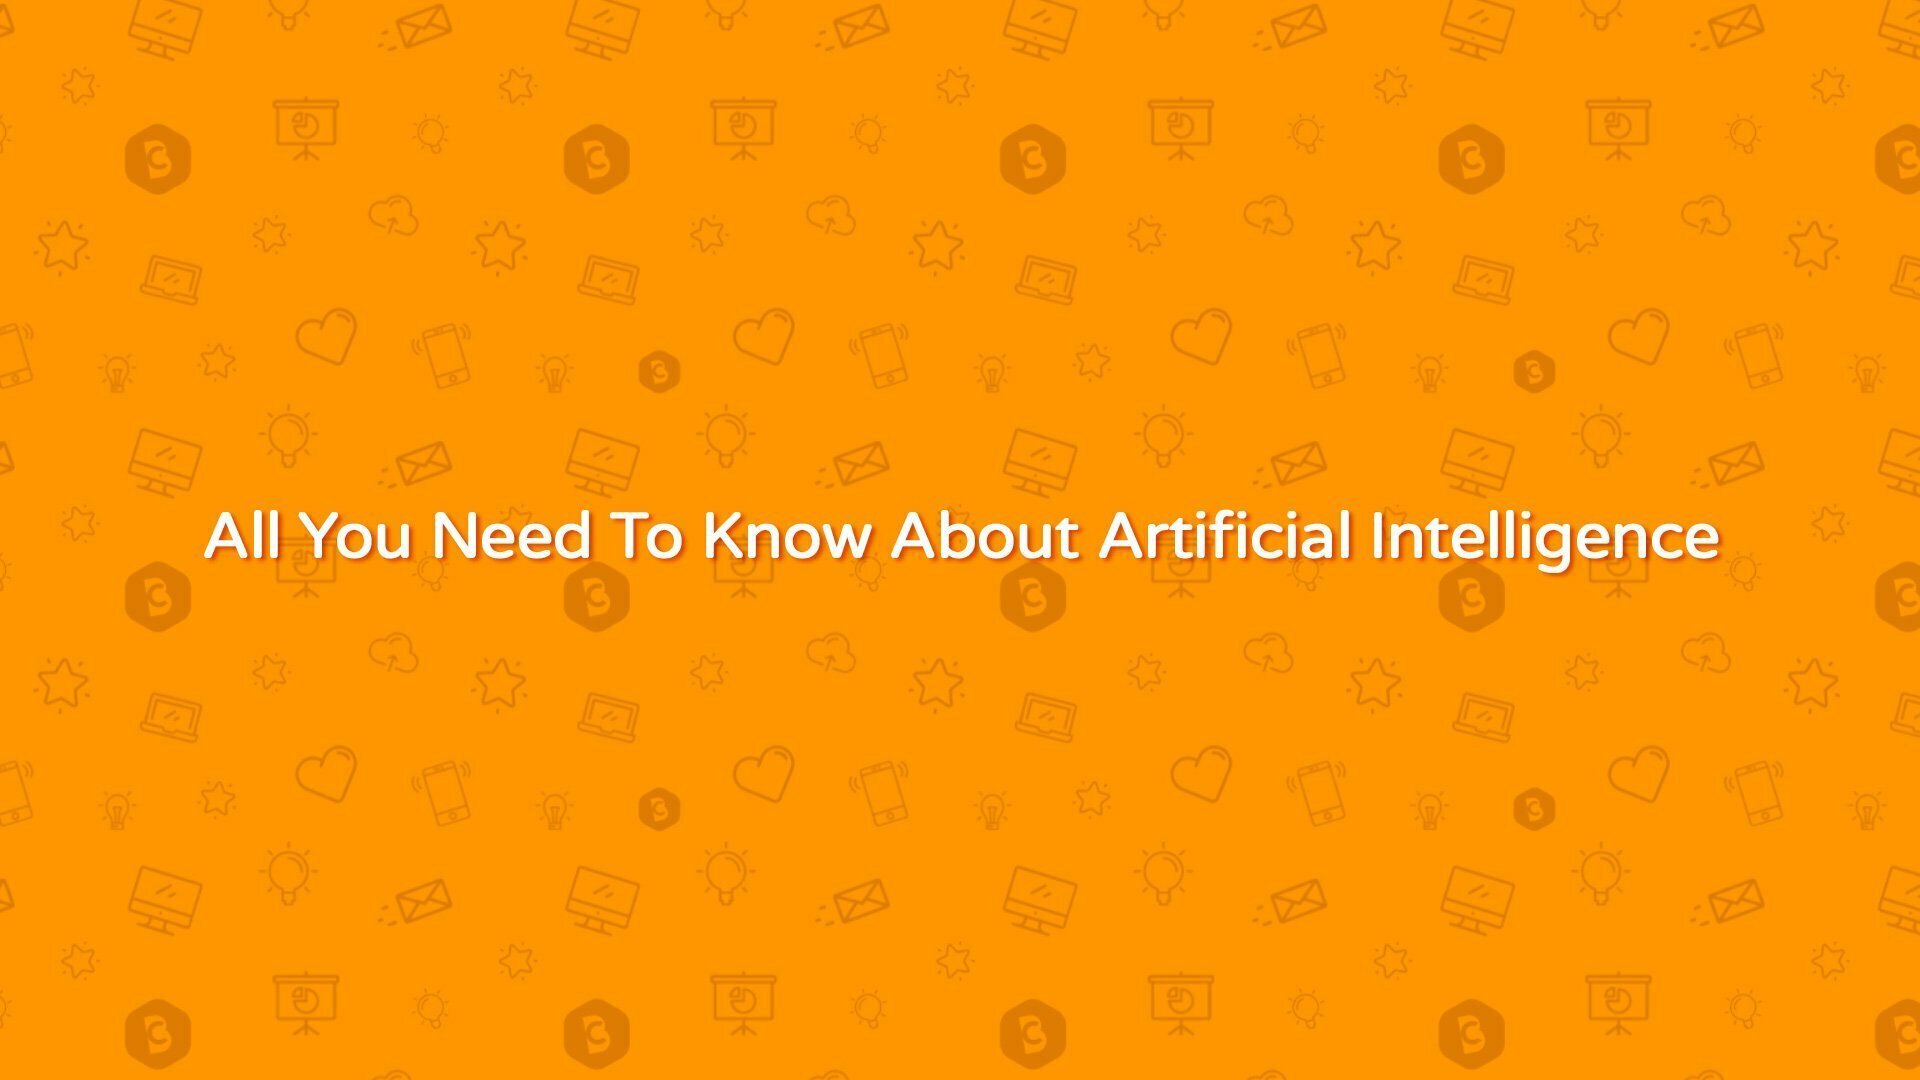 All You Need To Know About Artificial Intelligence